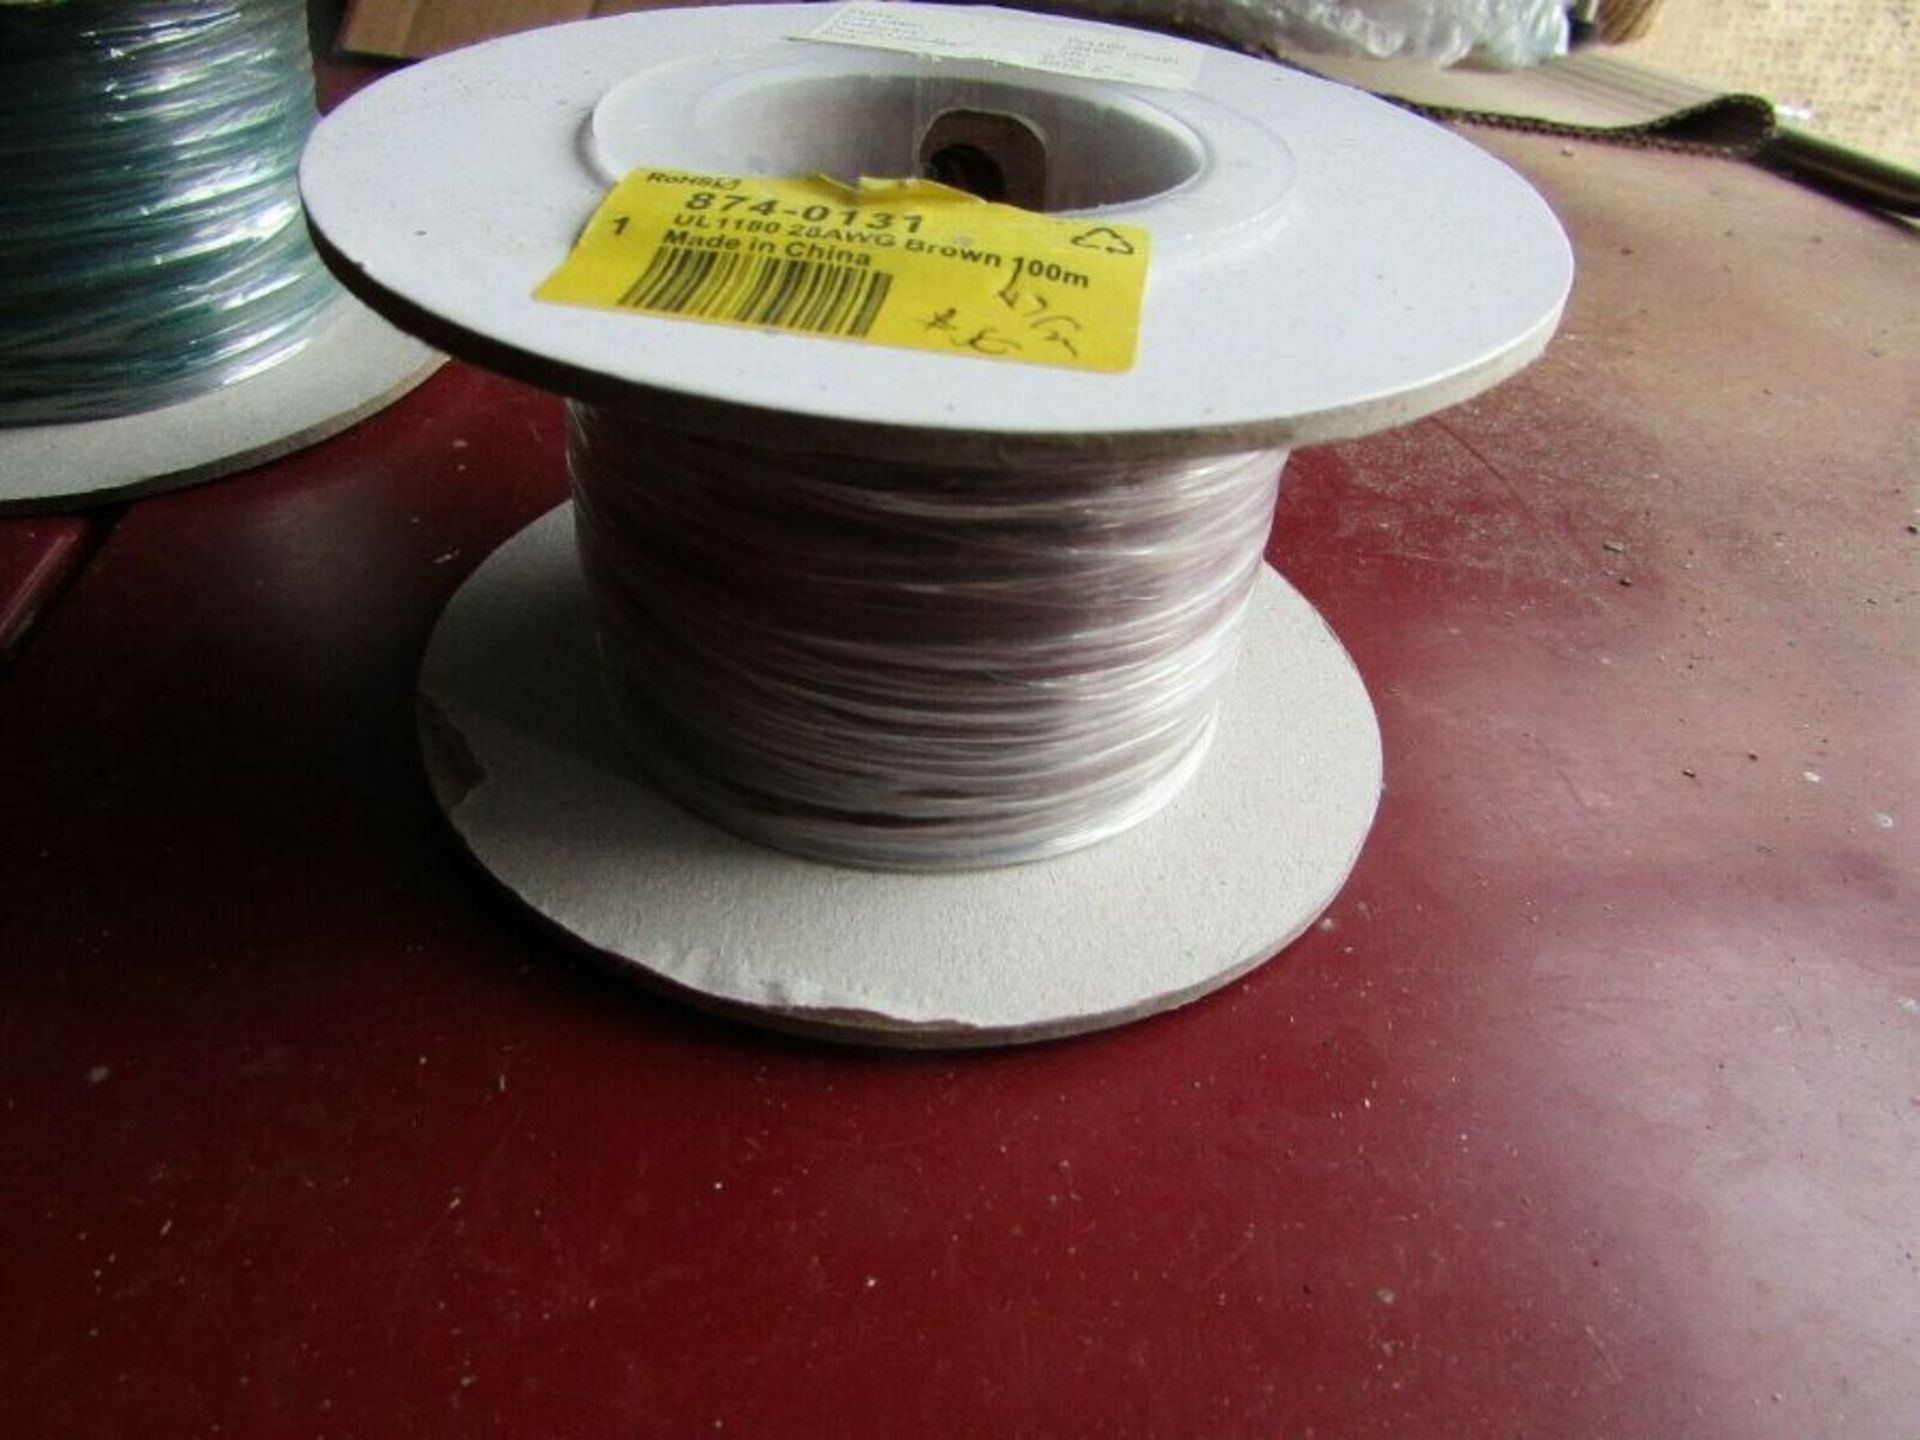 150 x 100m Reels of Assorted Cable / Hook Up Wire - 30 reels each of 5 different items - Image 5 of 6